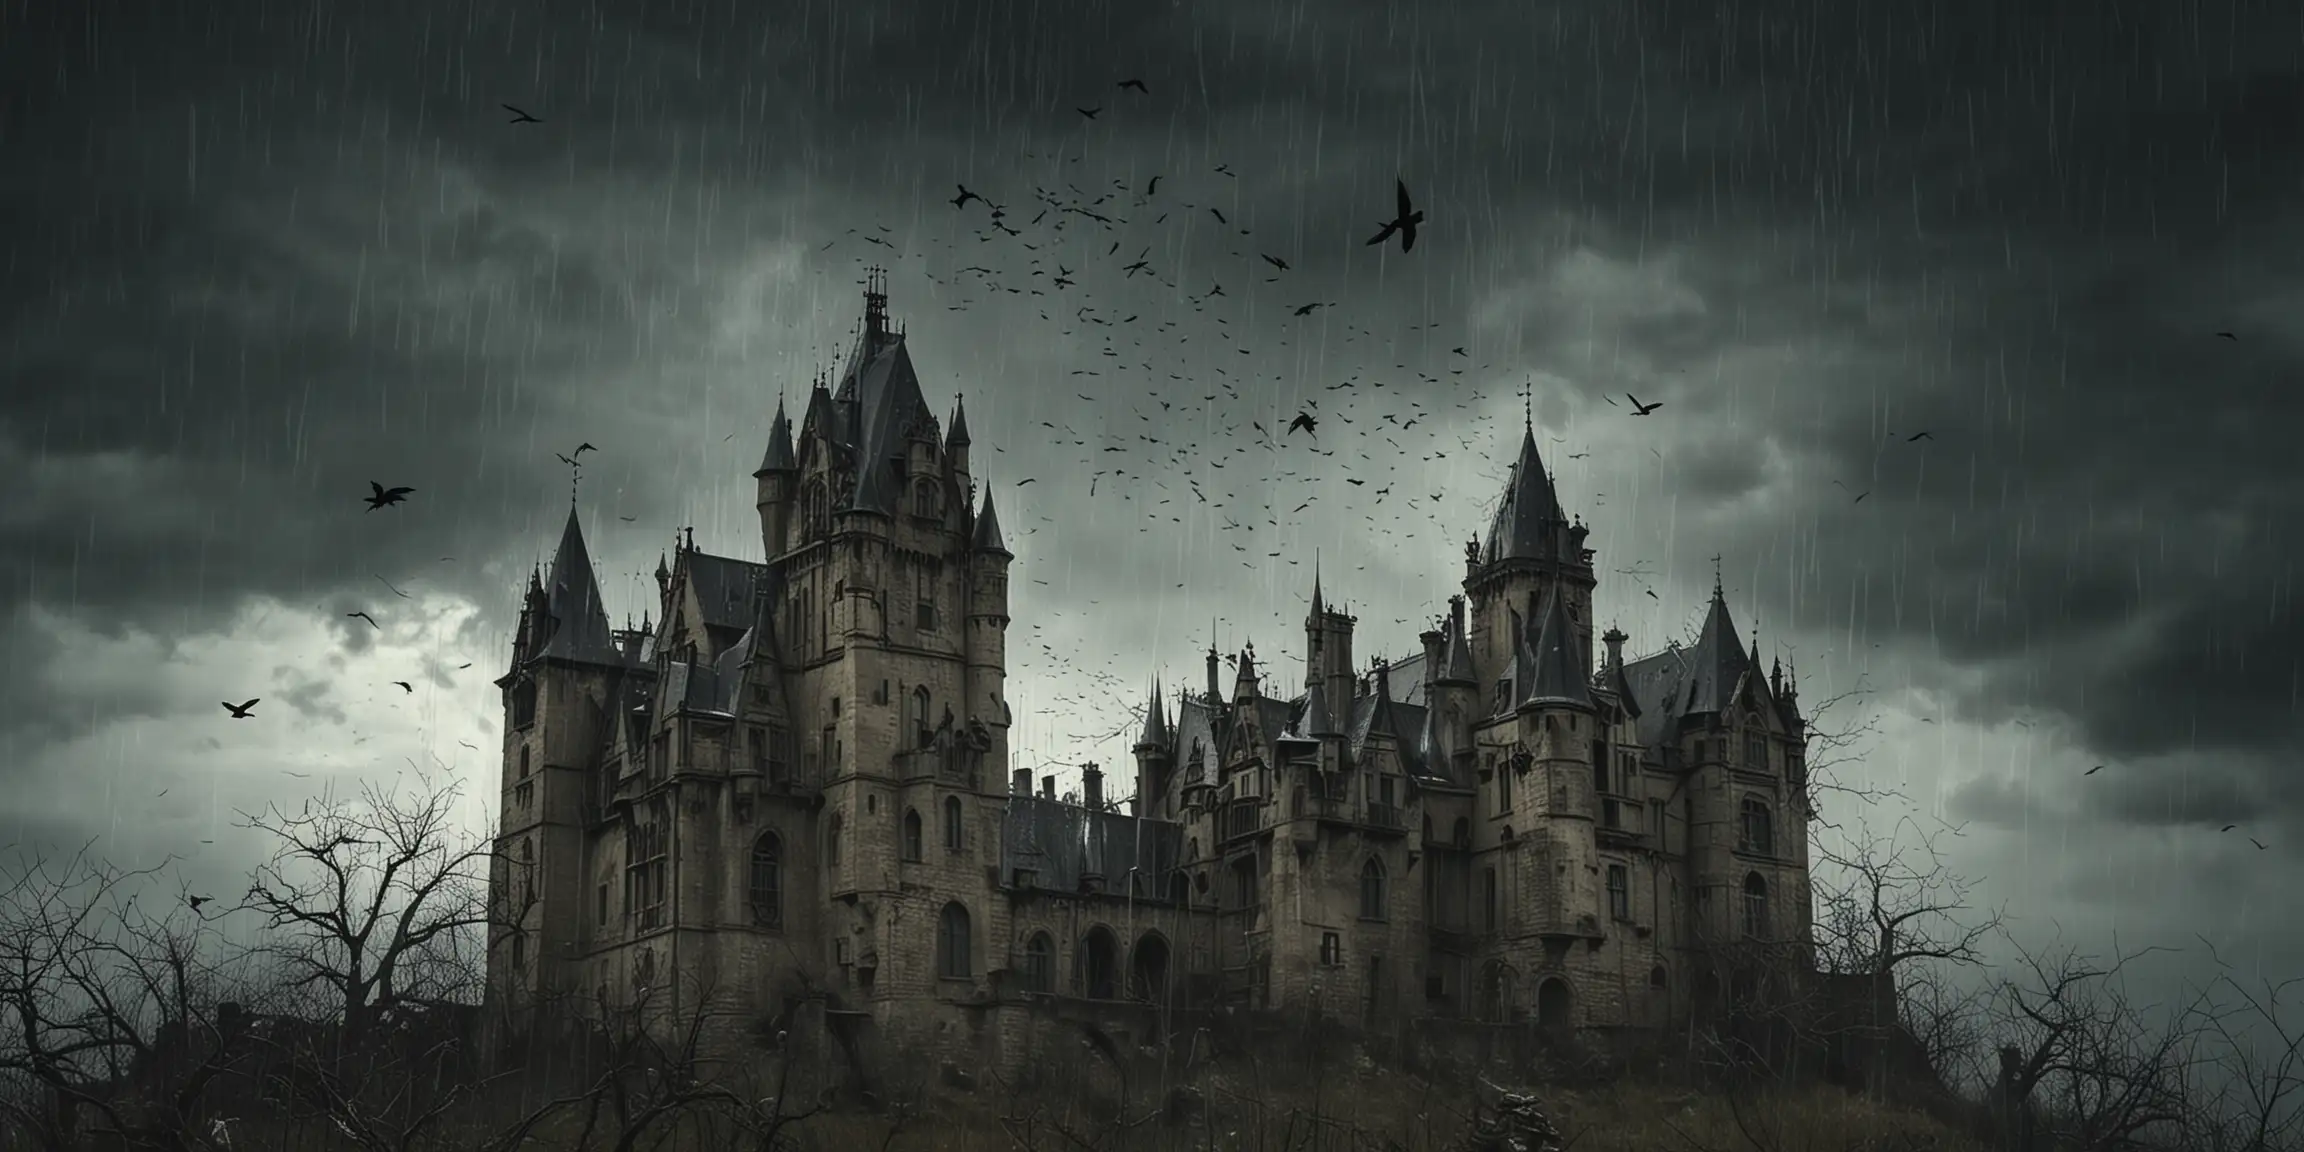 Eerie Gothic Castle in the Midst of a Storm with Crows and Cobwebs